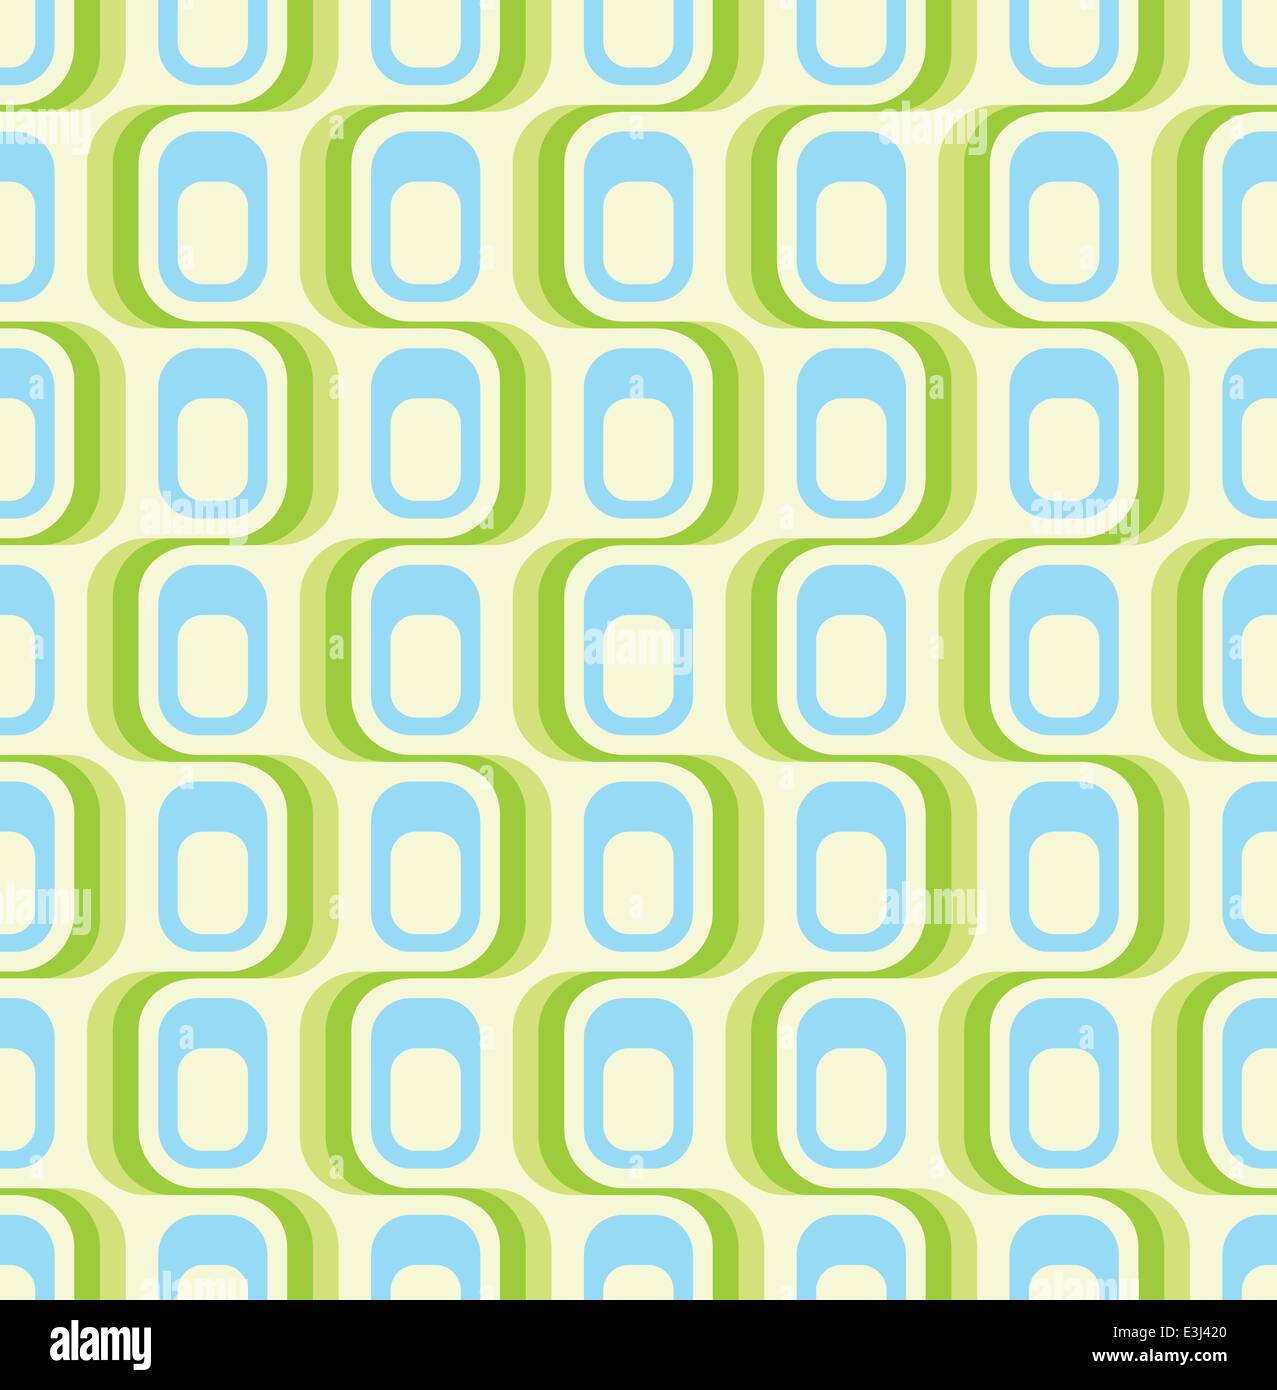 Retro green blue seamless pattern, tiles in any direction. Stock Vector